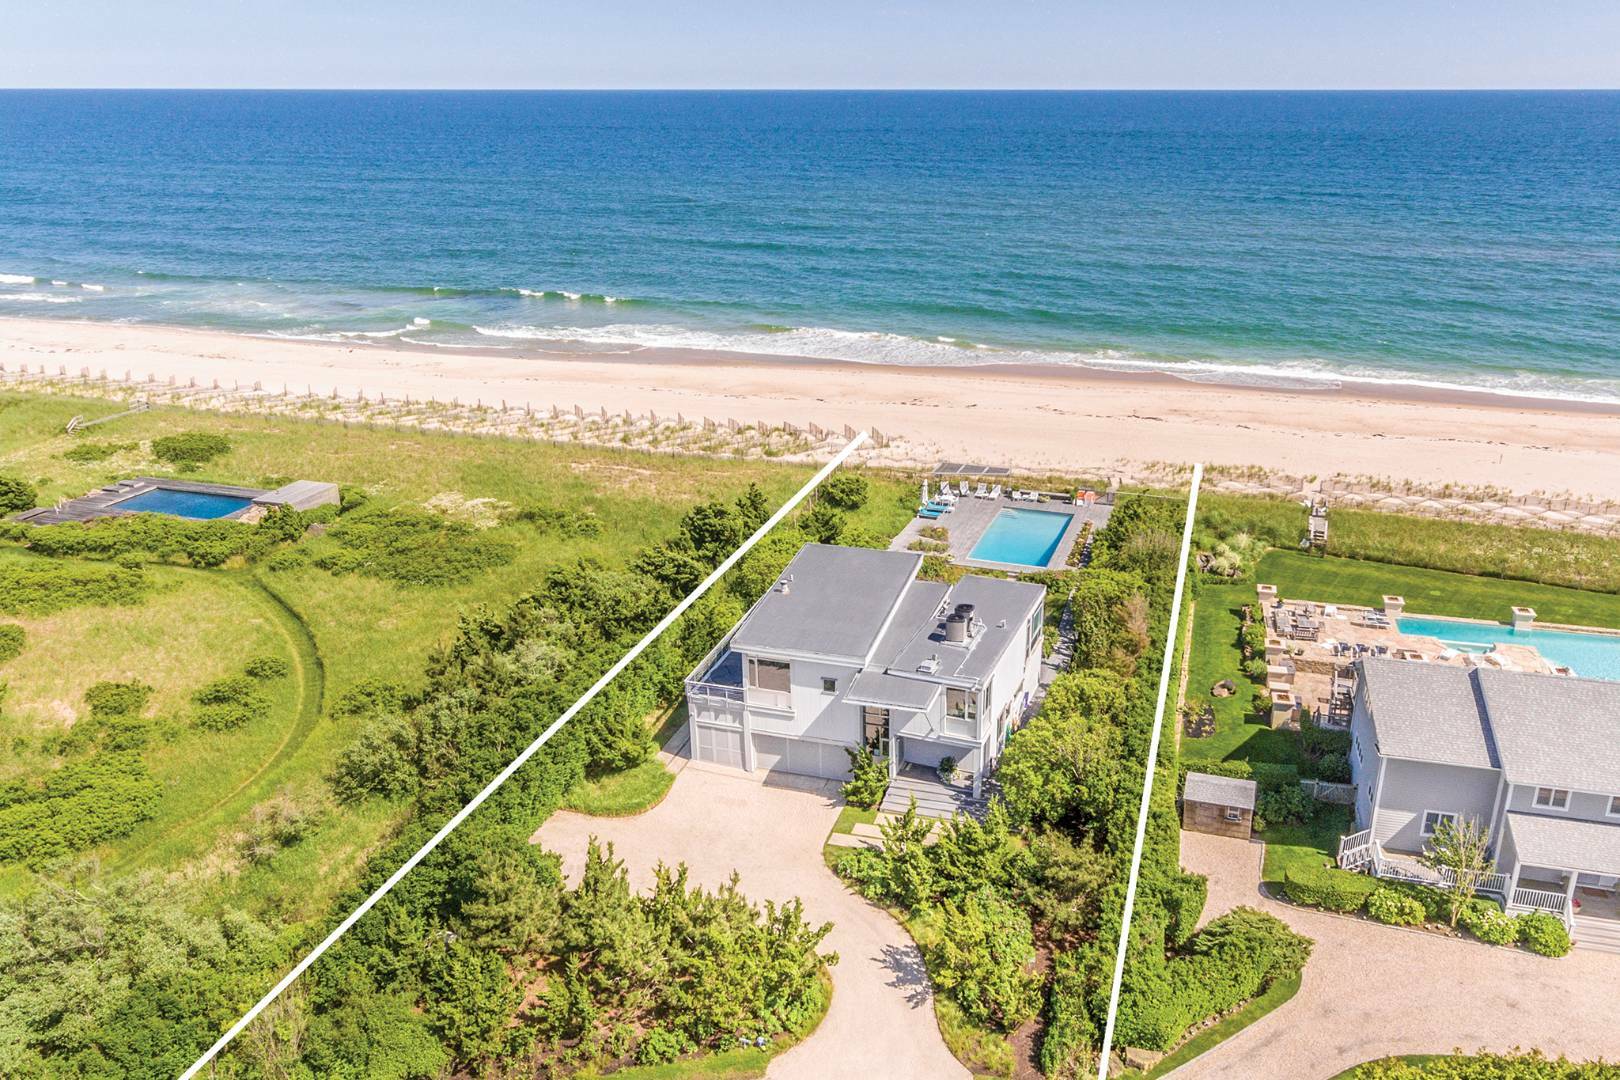 Recently sold in Sagaponack at 1 Potato Road.